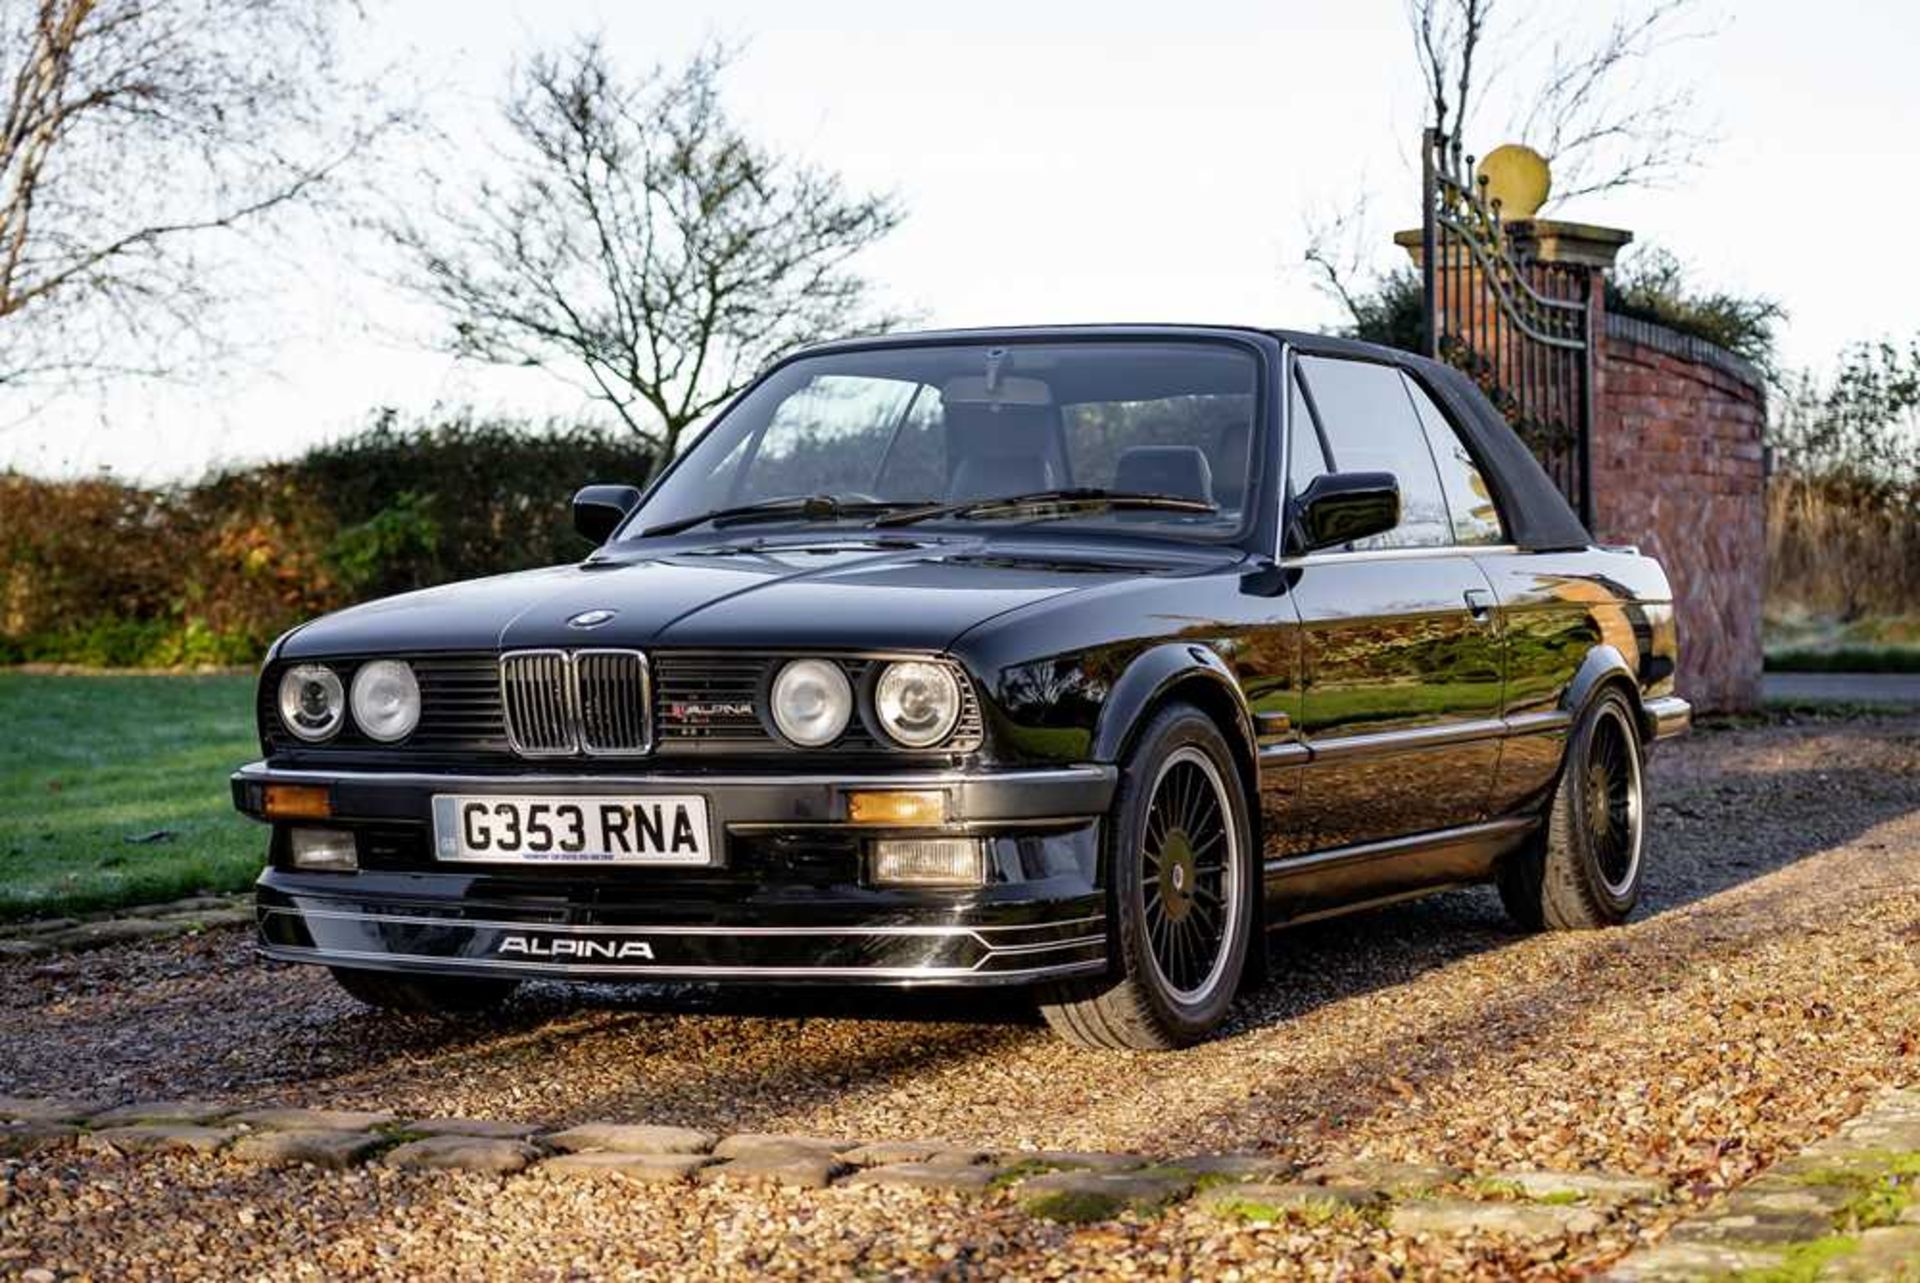 1989 BMW 320i Convertible Converted to Alpina 328i Specification - Image 5 of 51